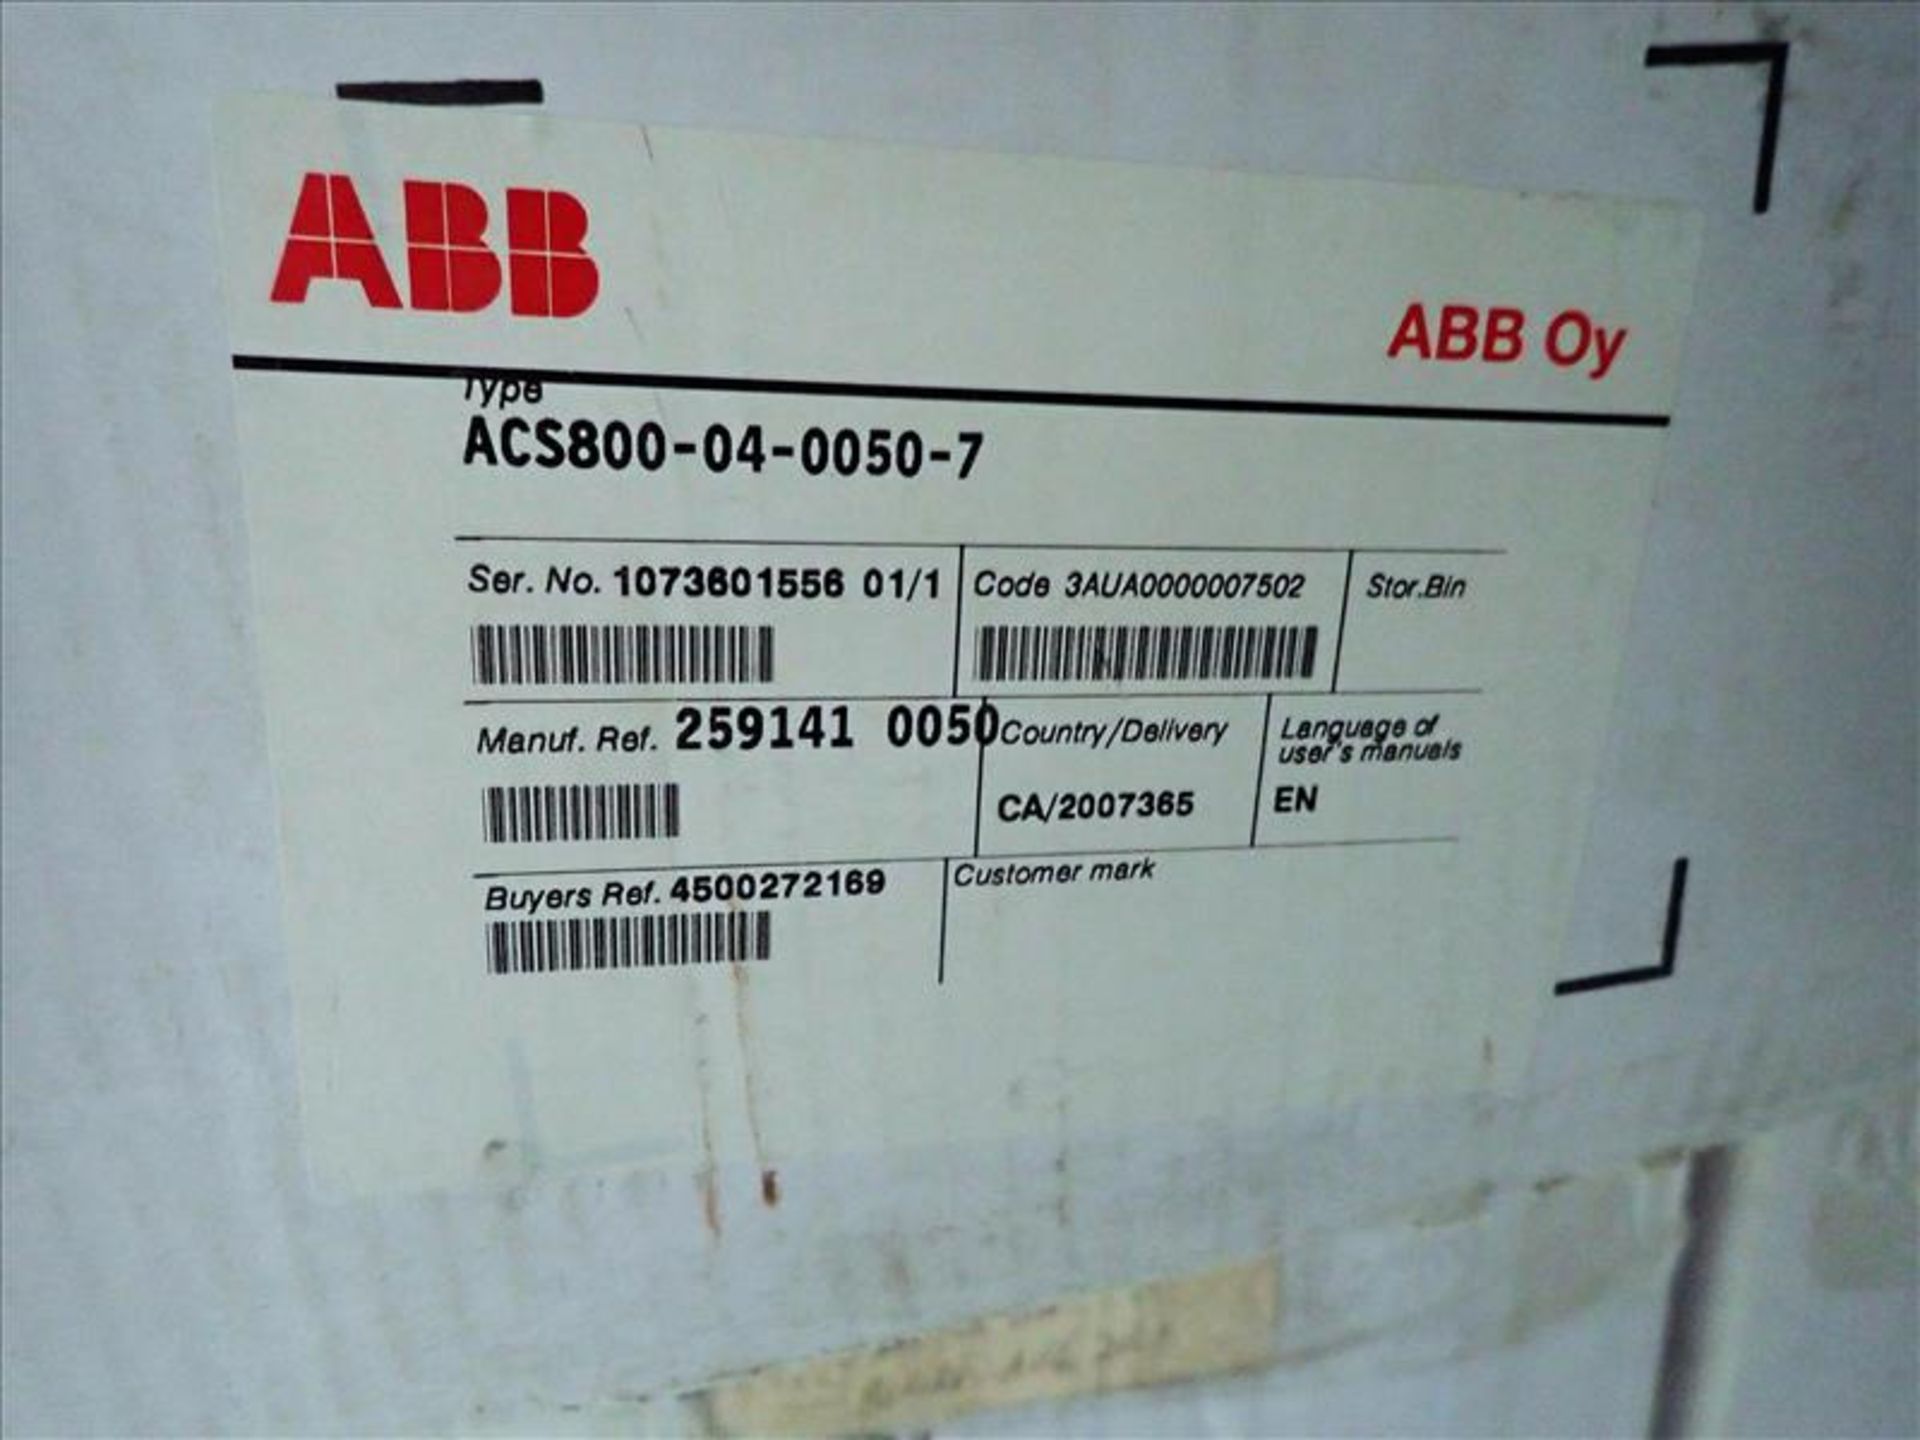 (NEW) ABB Variable Frequency Drives (VFD), incl.: (5) mod. ACS800-04-0020-7; (3) mod. ACS800-04- - Image 3 of 3